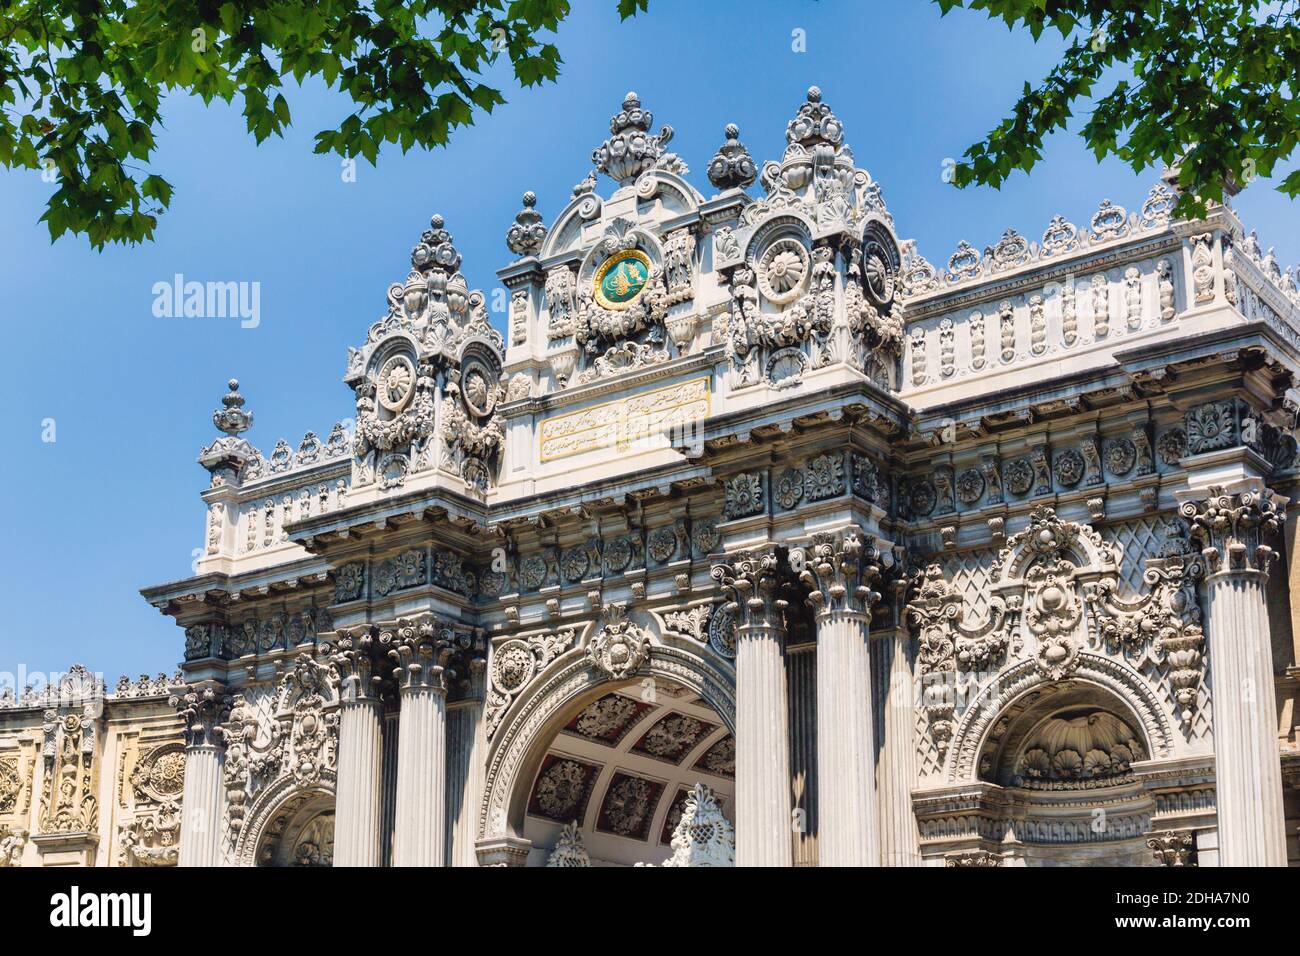 Istanbul, Turkey.  Imperial Gate.  Main entrance to the Dolmabahce Palace and gardens. Stock Photo